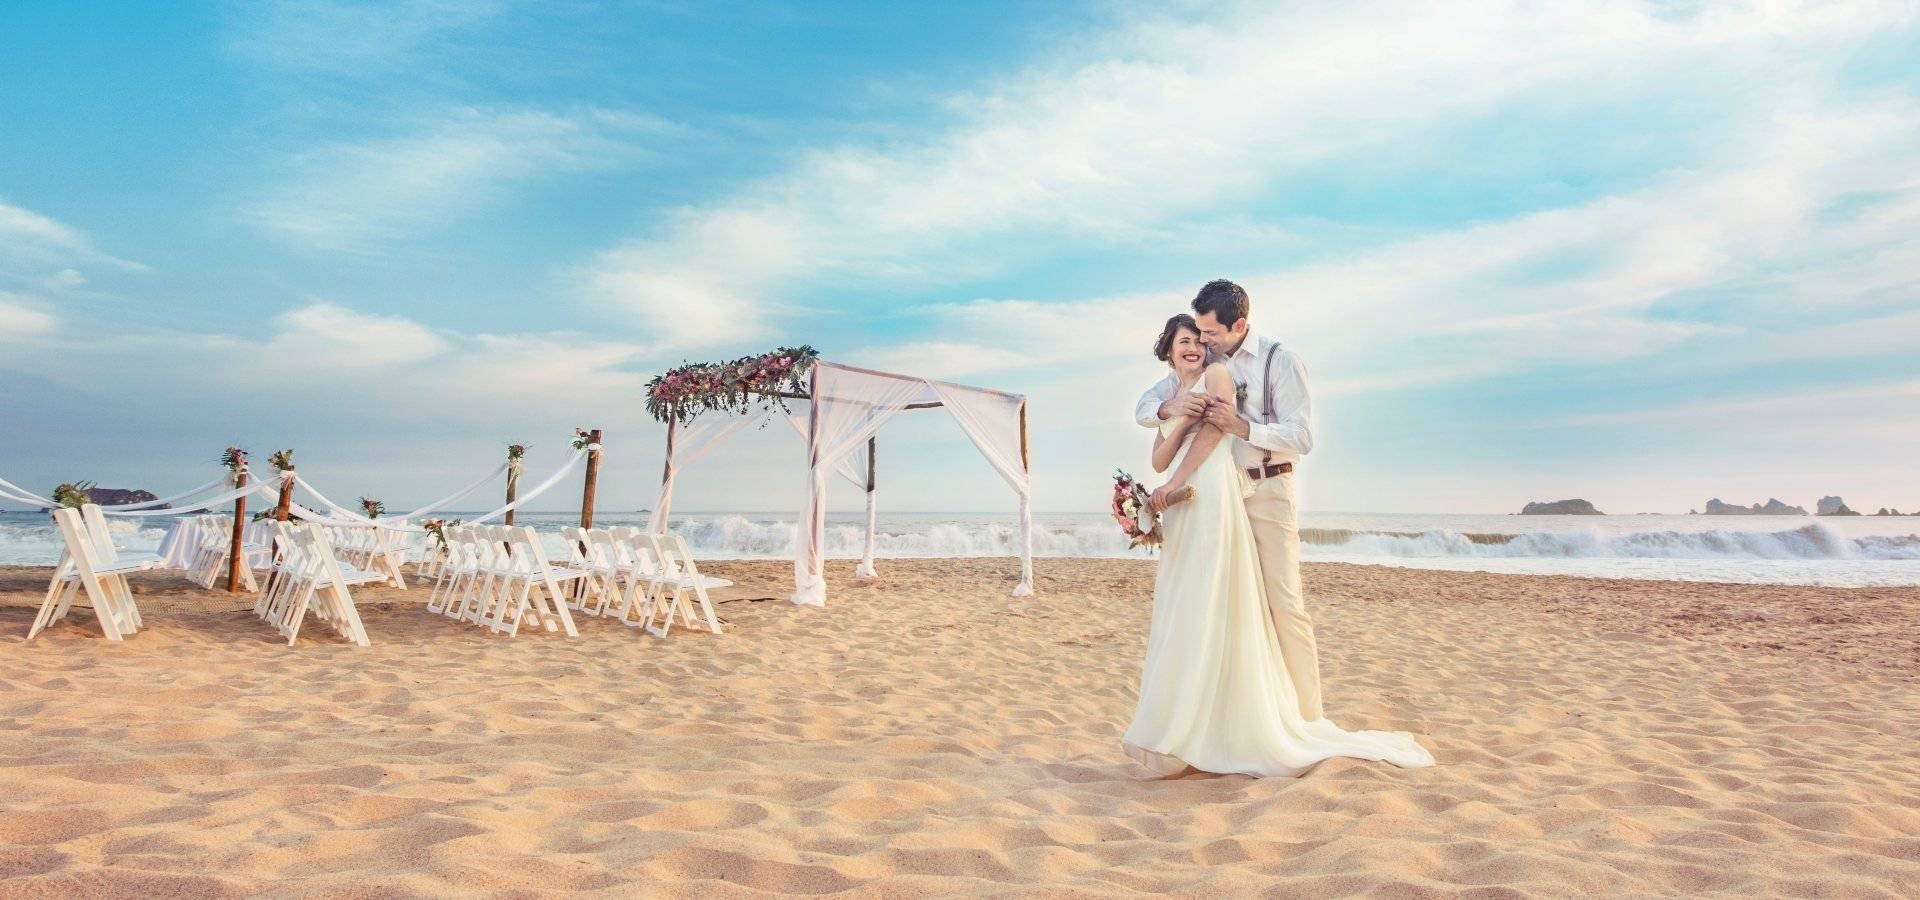 Five Reasons To Get Married in Huatulco, Mexico